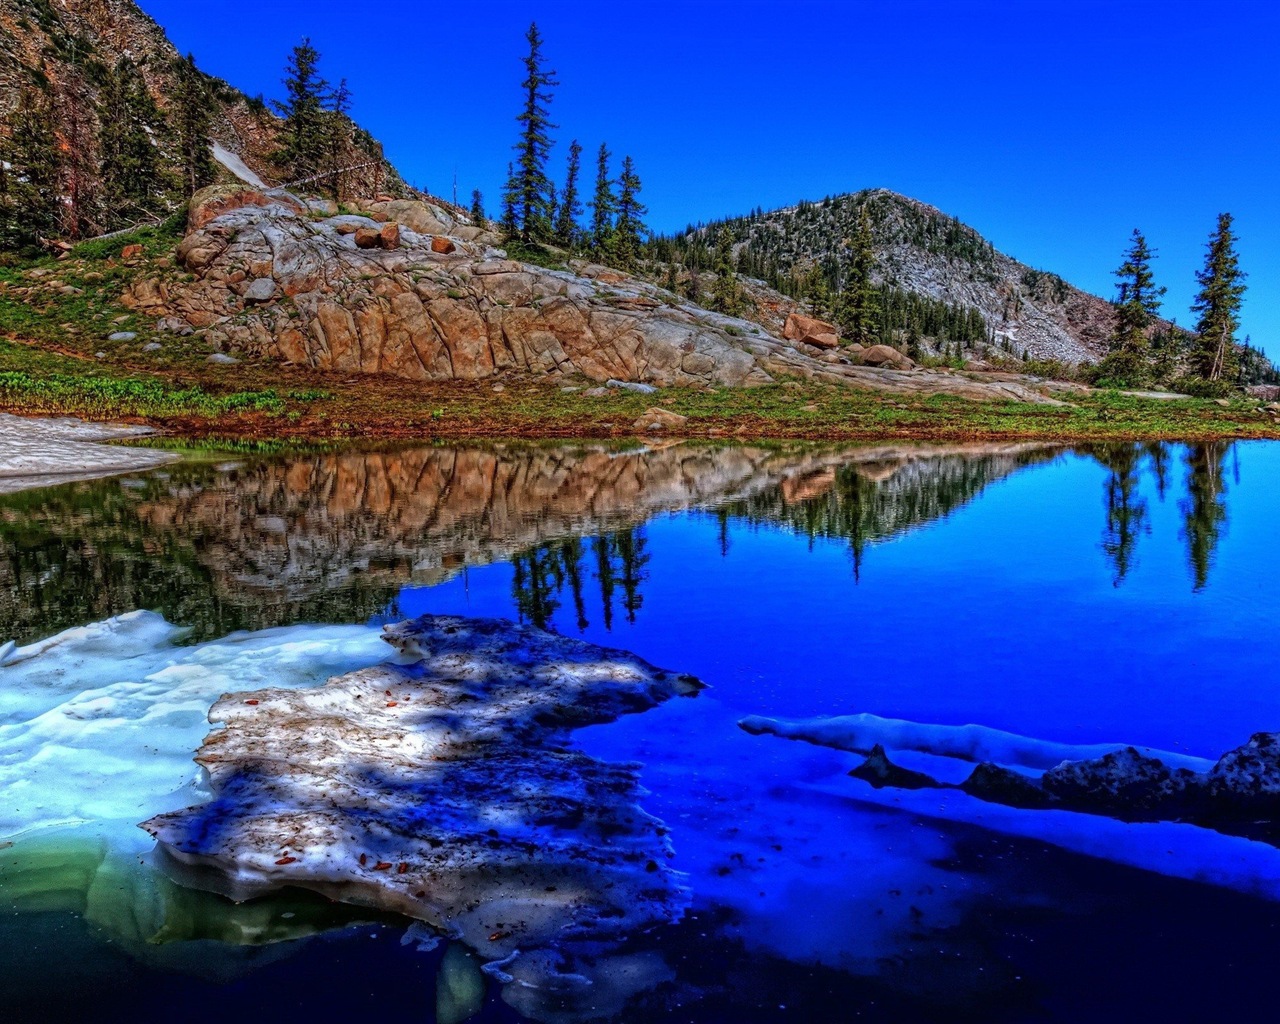 Reflection in the water natural scenery wallpaper #20 - 1280x1024